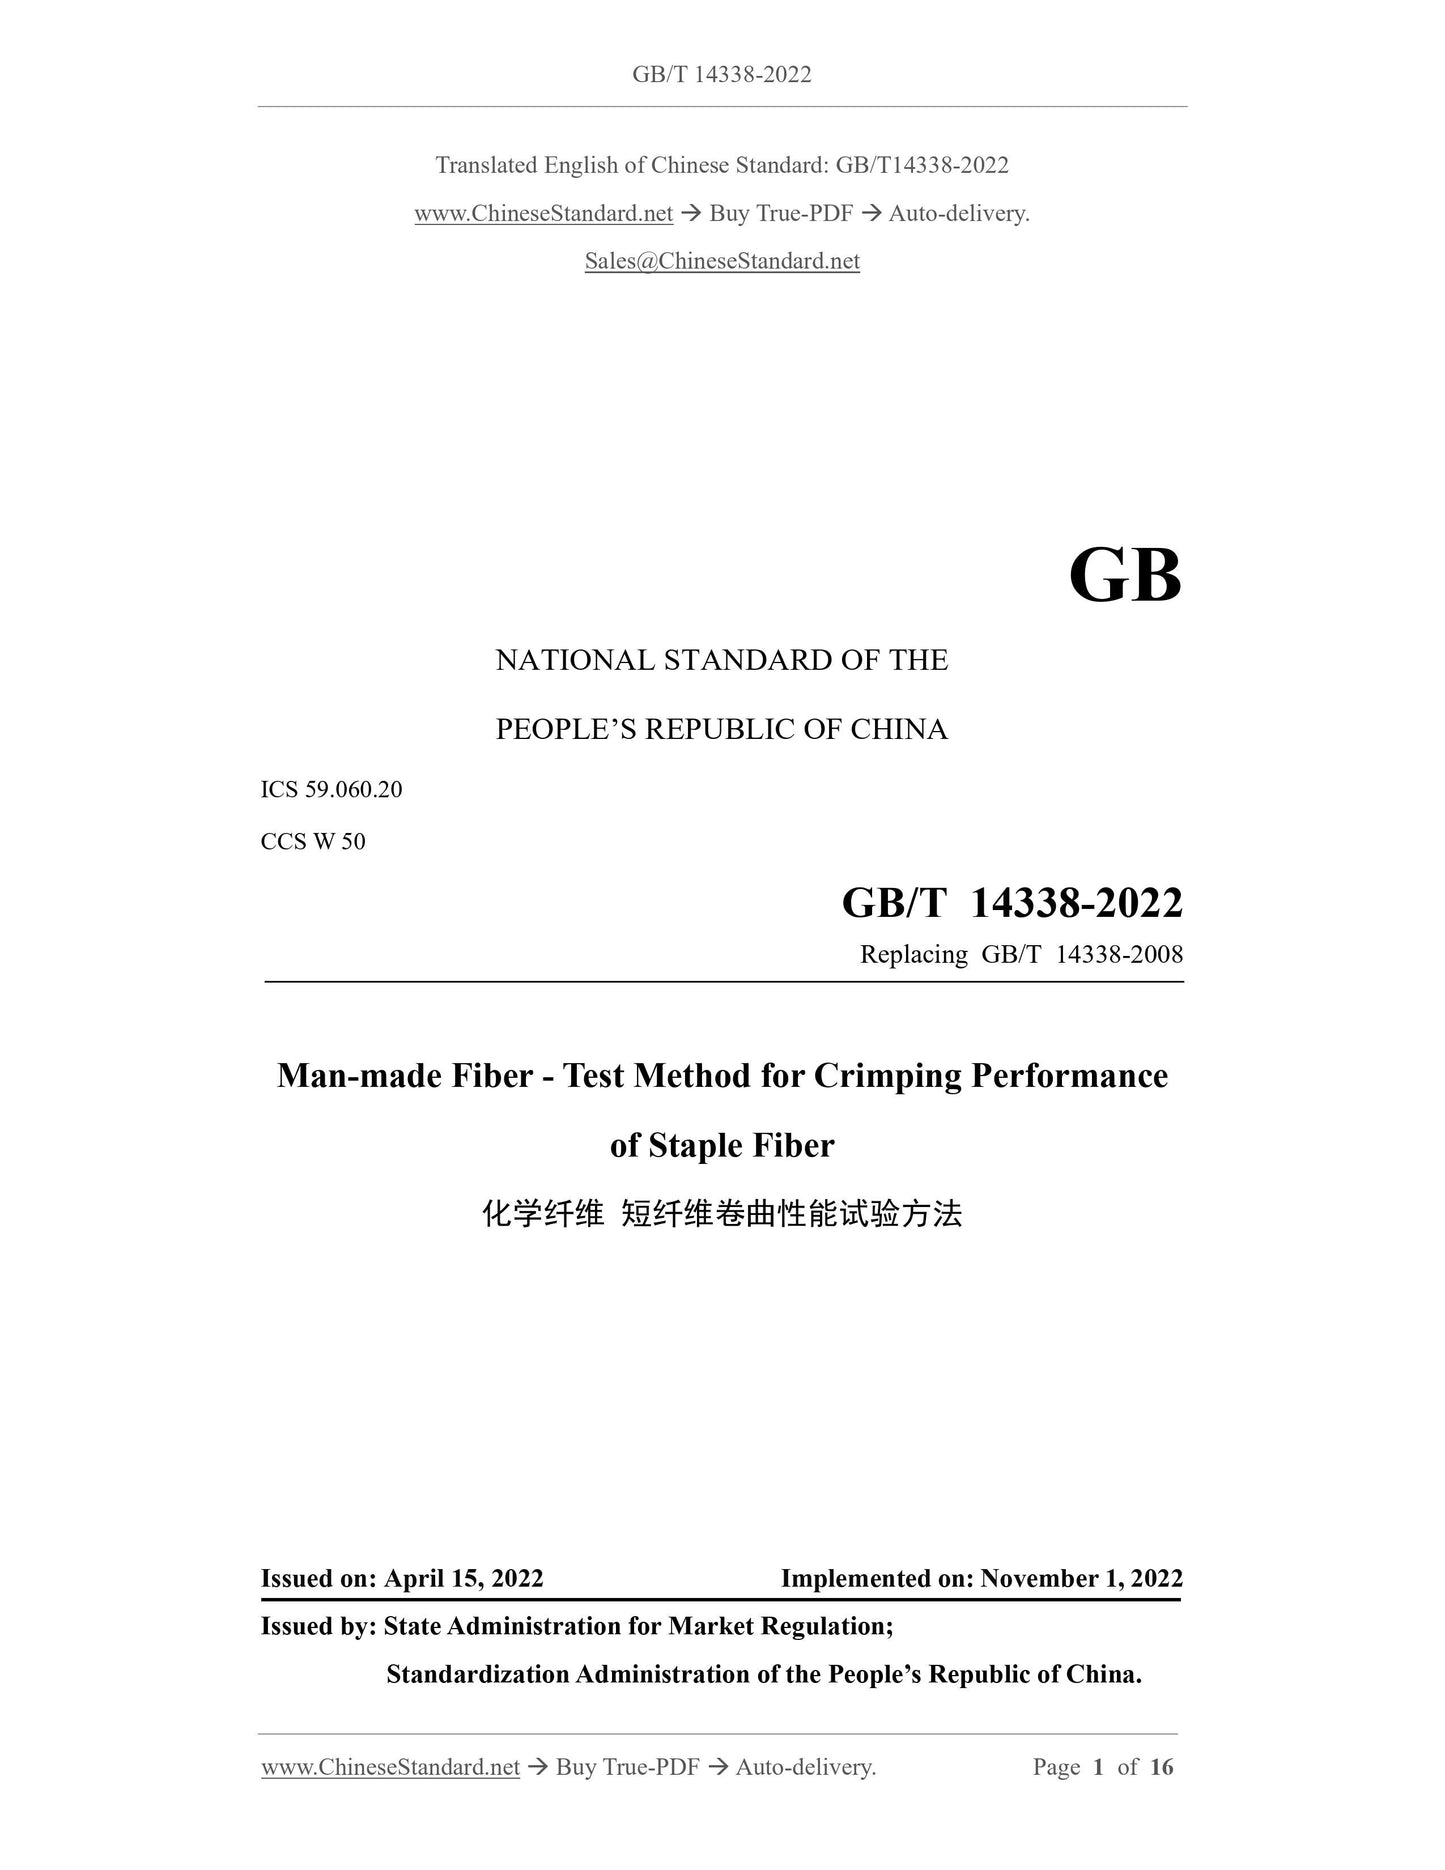 GB/T 14338-2022 Page 1